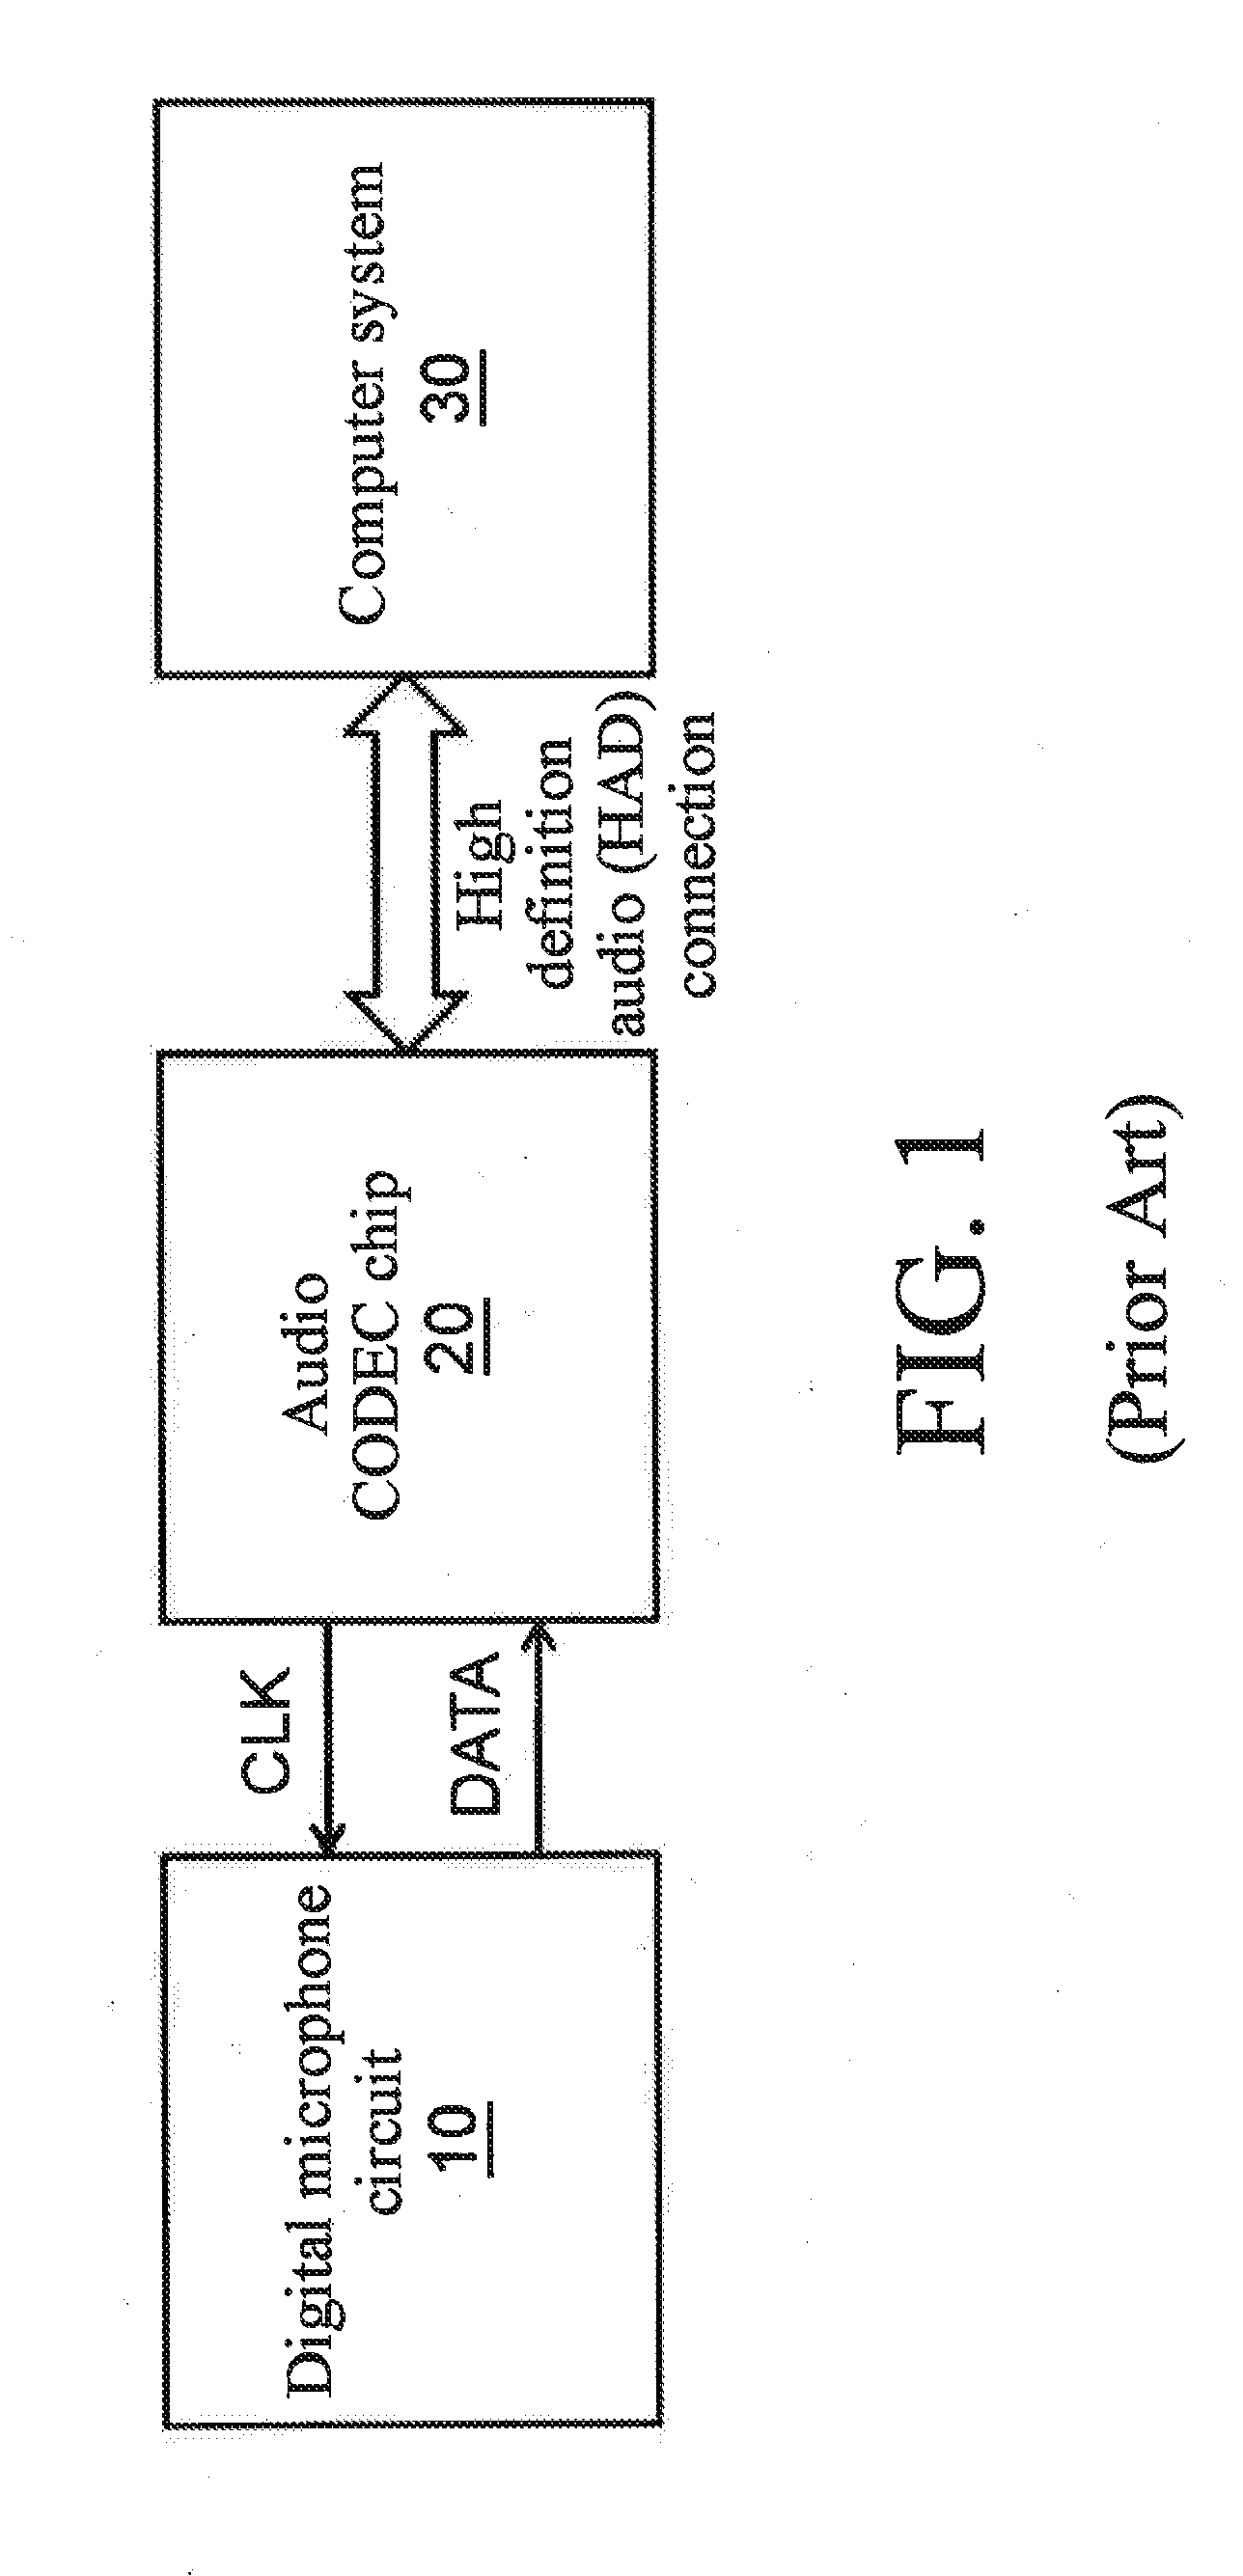 Digital microphone system, audio control device, and control method thereof